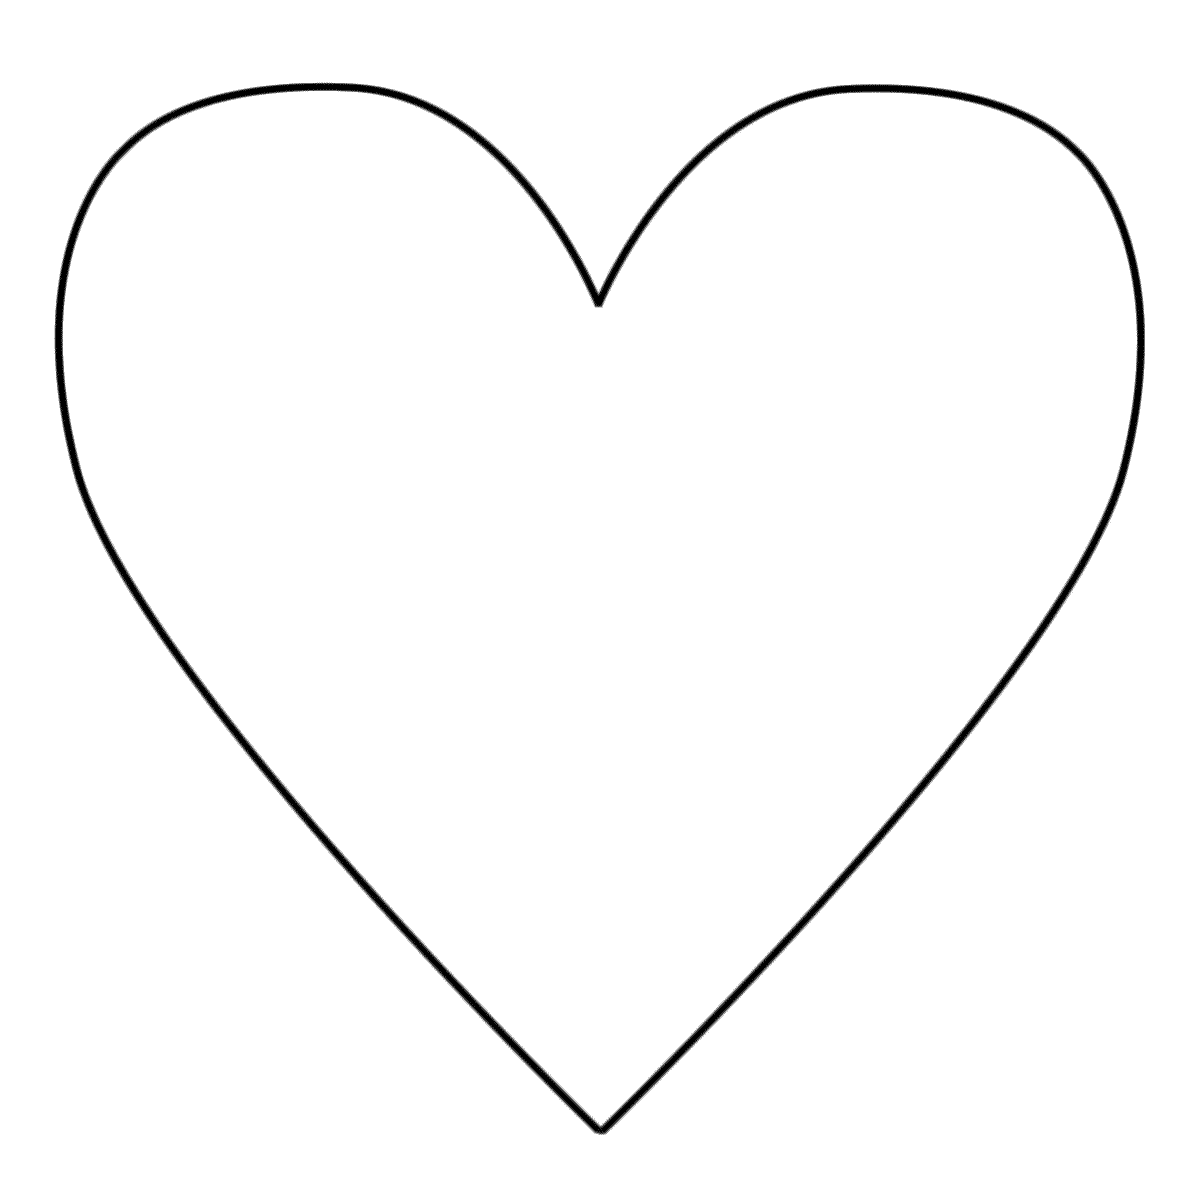 Download Heart Coloring Pages - Coloring Kids